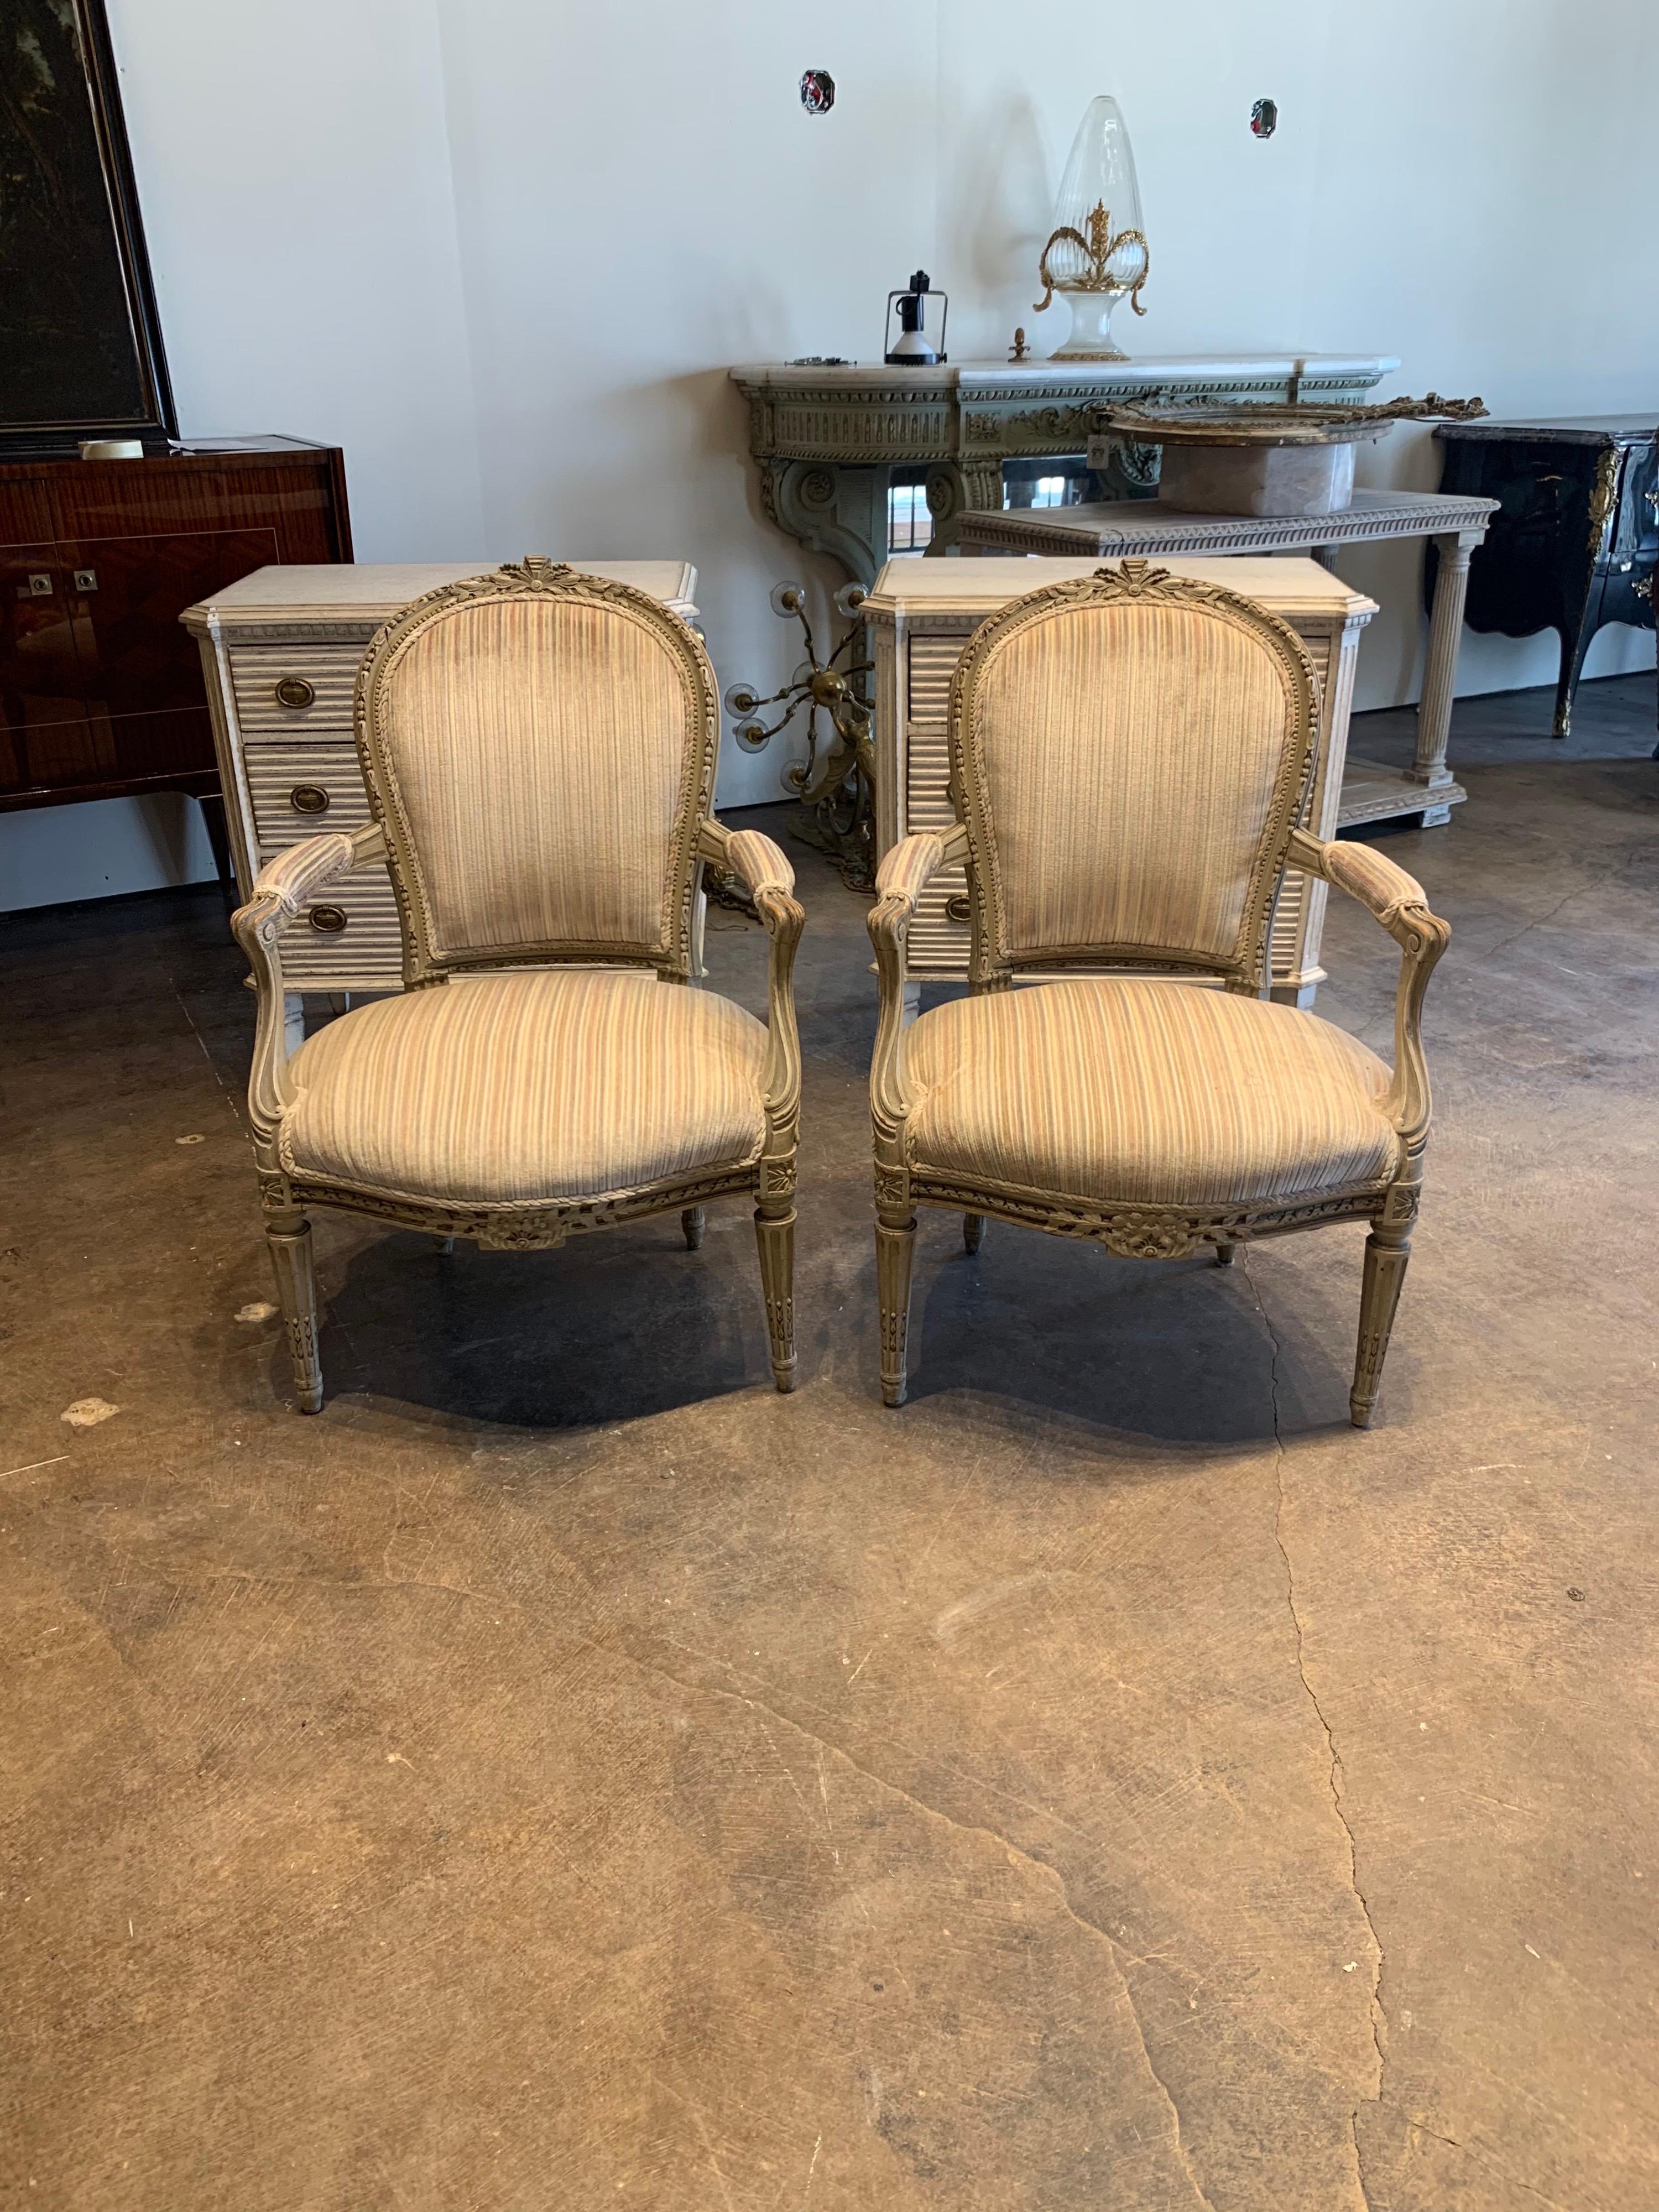 Exquisite pair of 19th century French Louis XVI style carved and painted armchairs. Upholstered in a plush velour fabric and they have a very fine carvings and patina. So pretty!